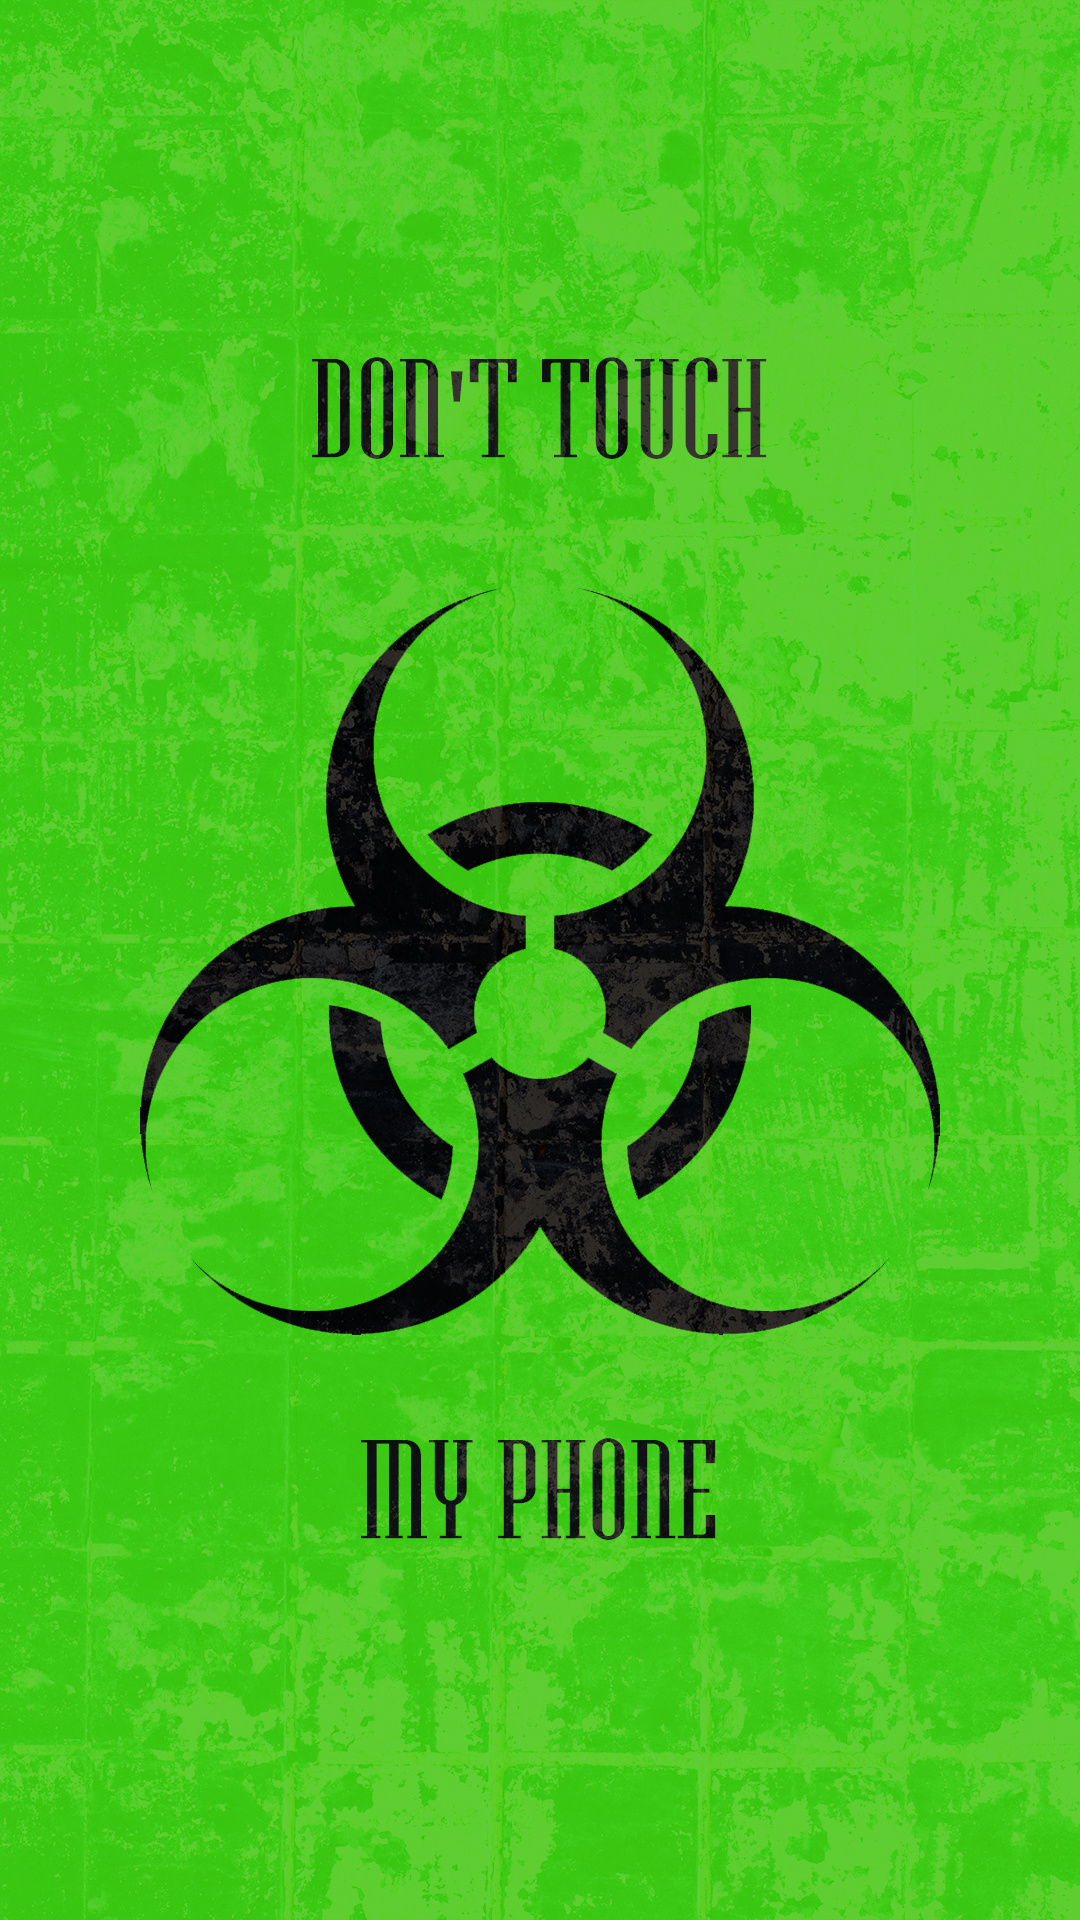 Don't touch my phone, Protective wallpaper, Personalized background, Prevent unauthorized access, 1080x1920 Full HD Phone